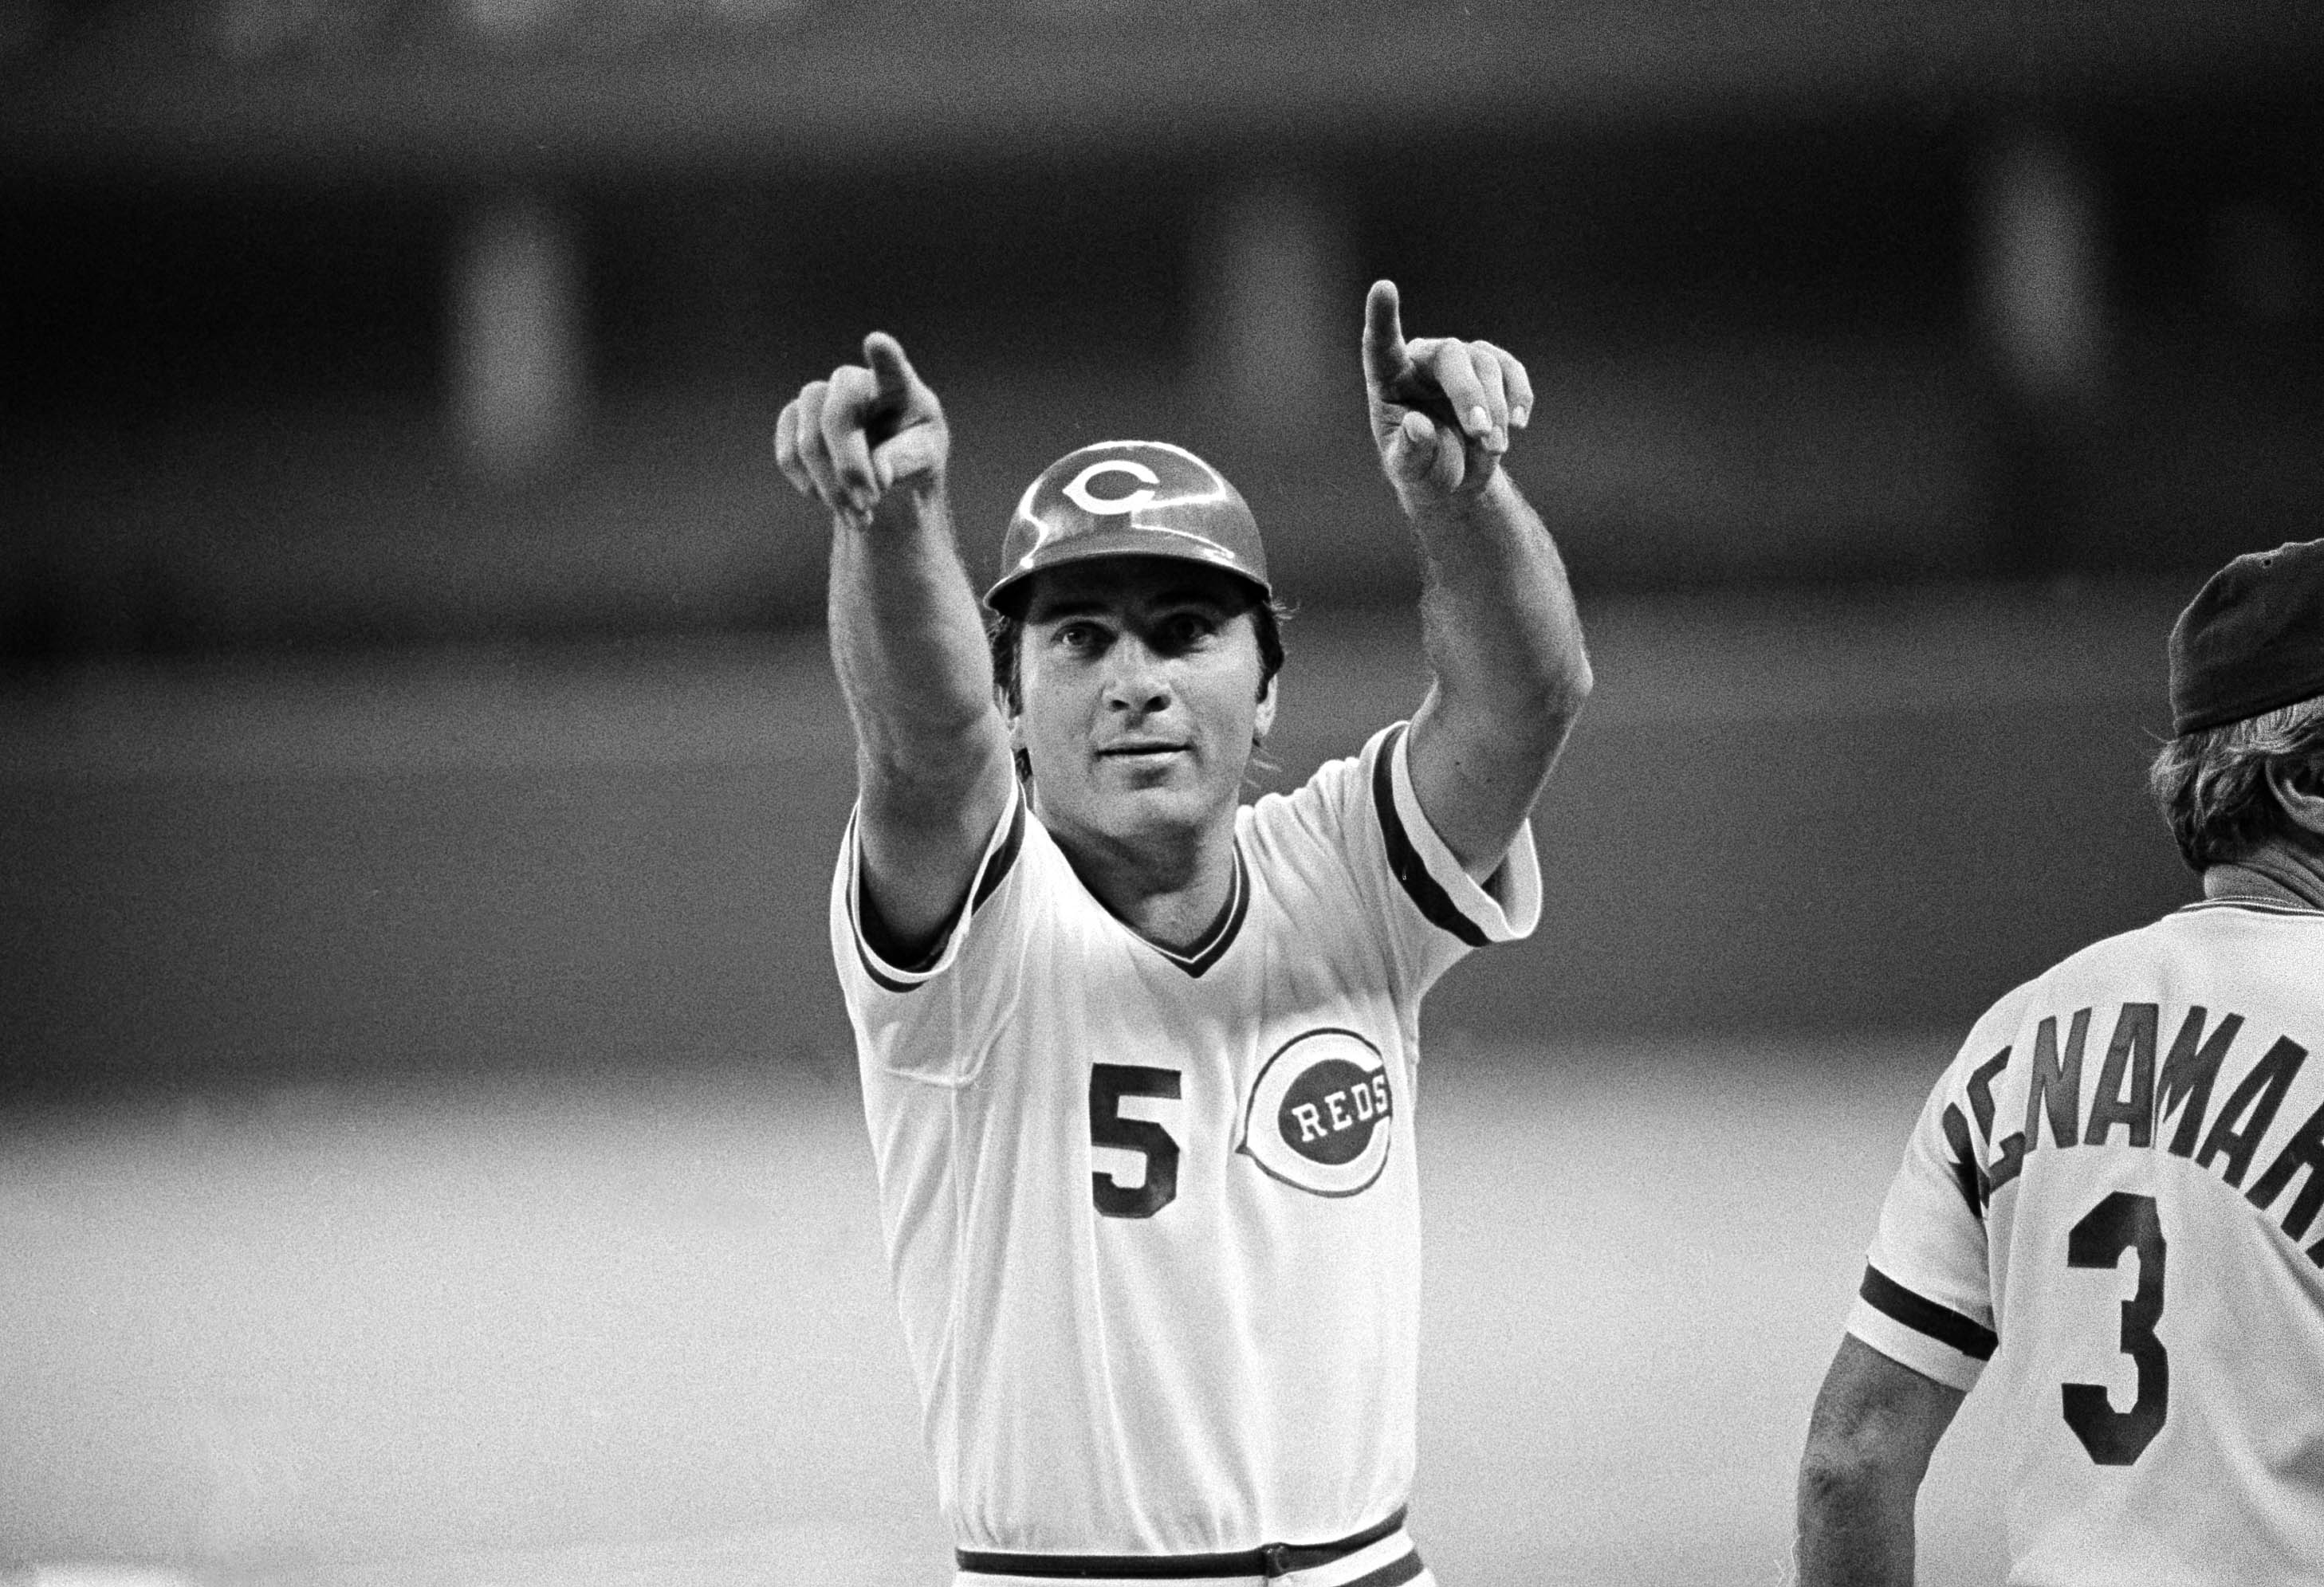 Cincinnati Reds - Today in Reds history,1967: Johnny Bench makes